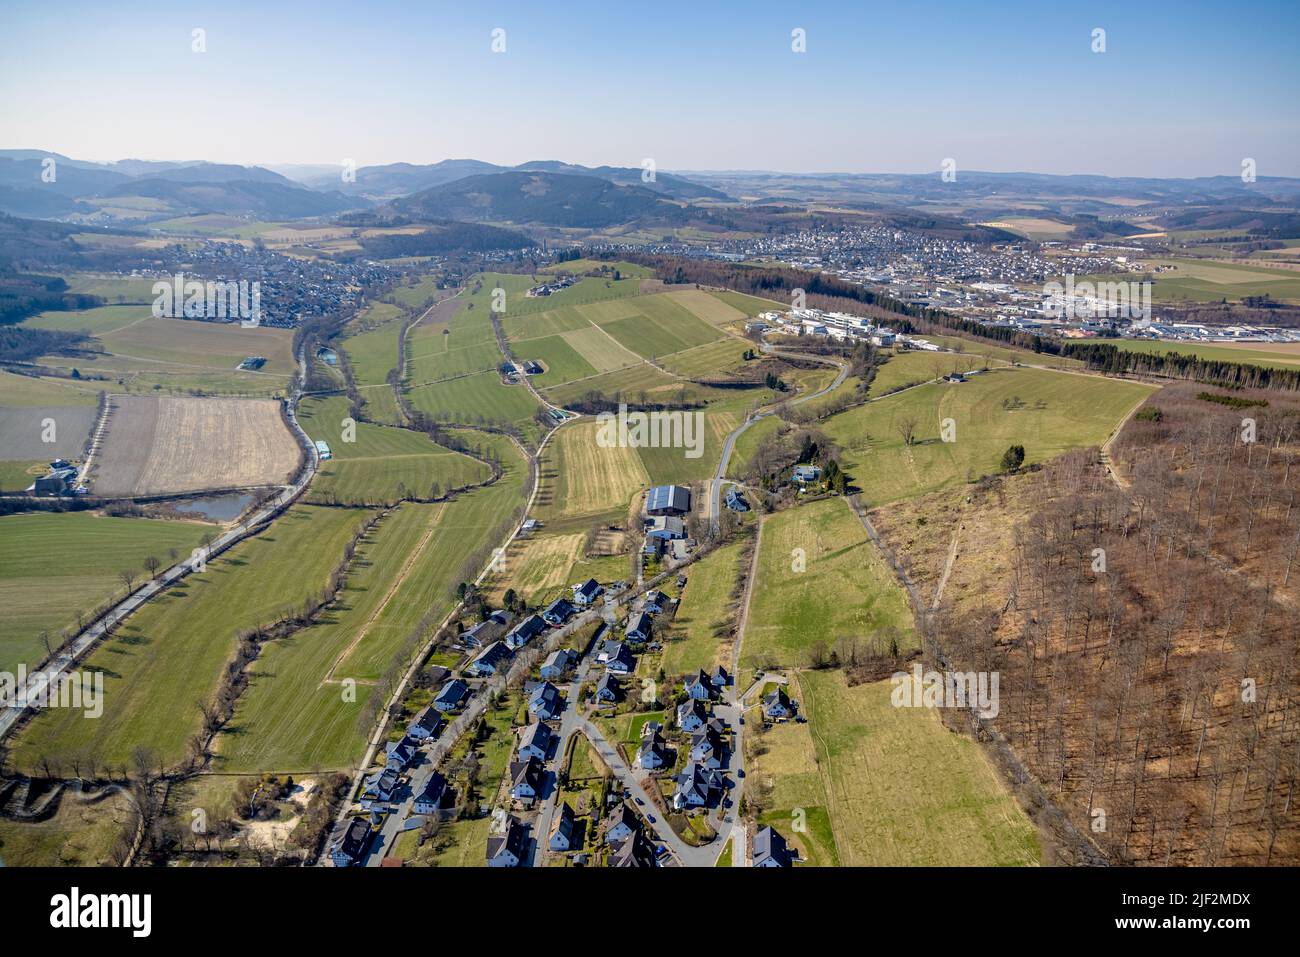 Aerial photograph, Klosterblick residential area, Am Wilzenberg, in the background the Fraunhofer Institute for Molecular Biology and Applied Ecology, Stock Photo